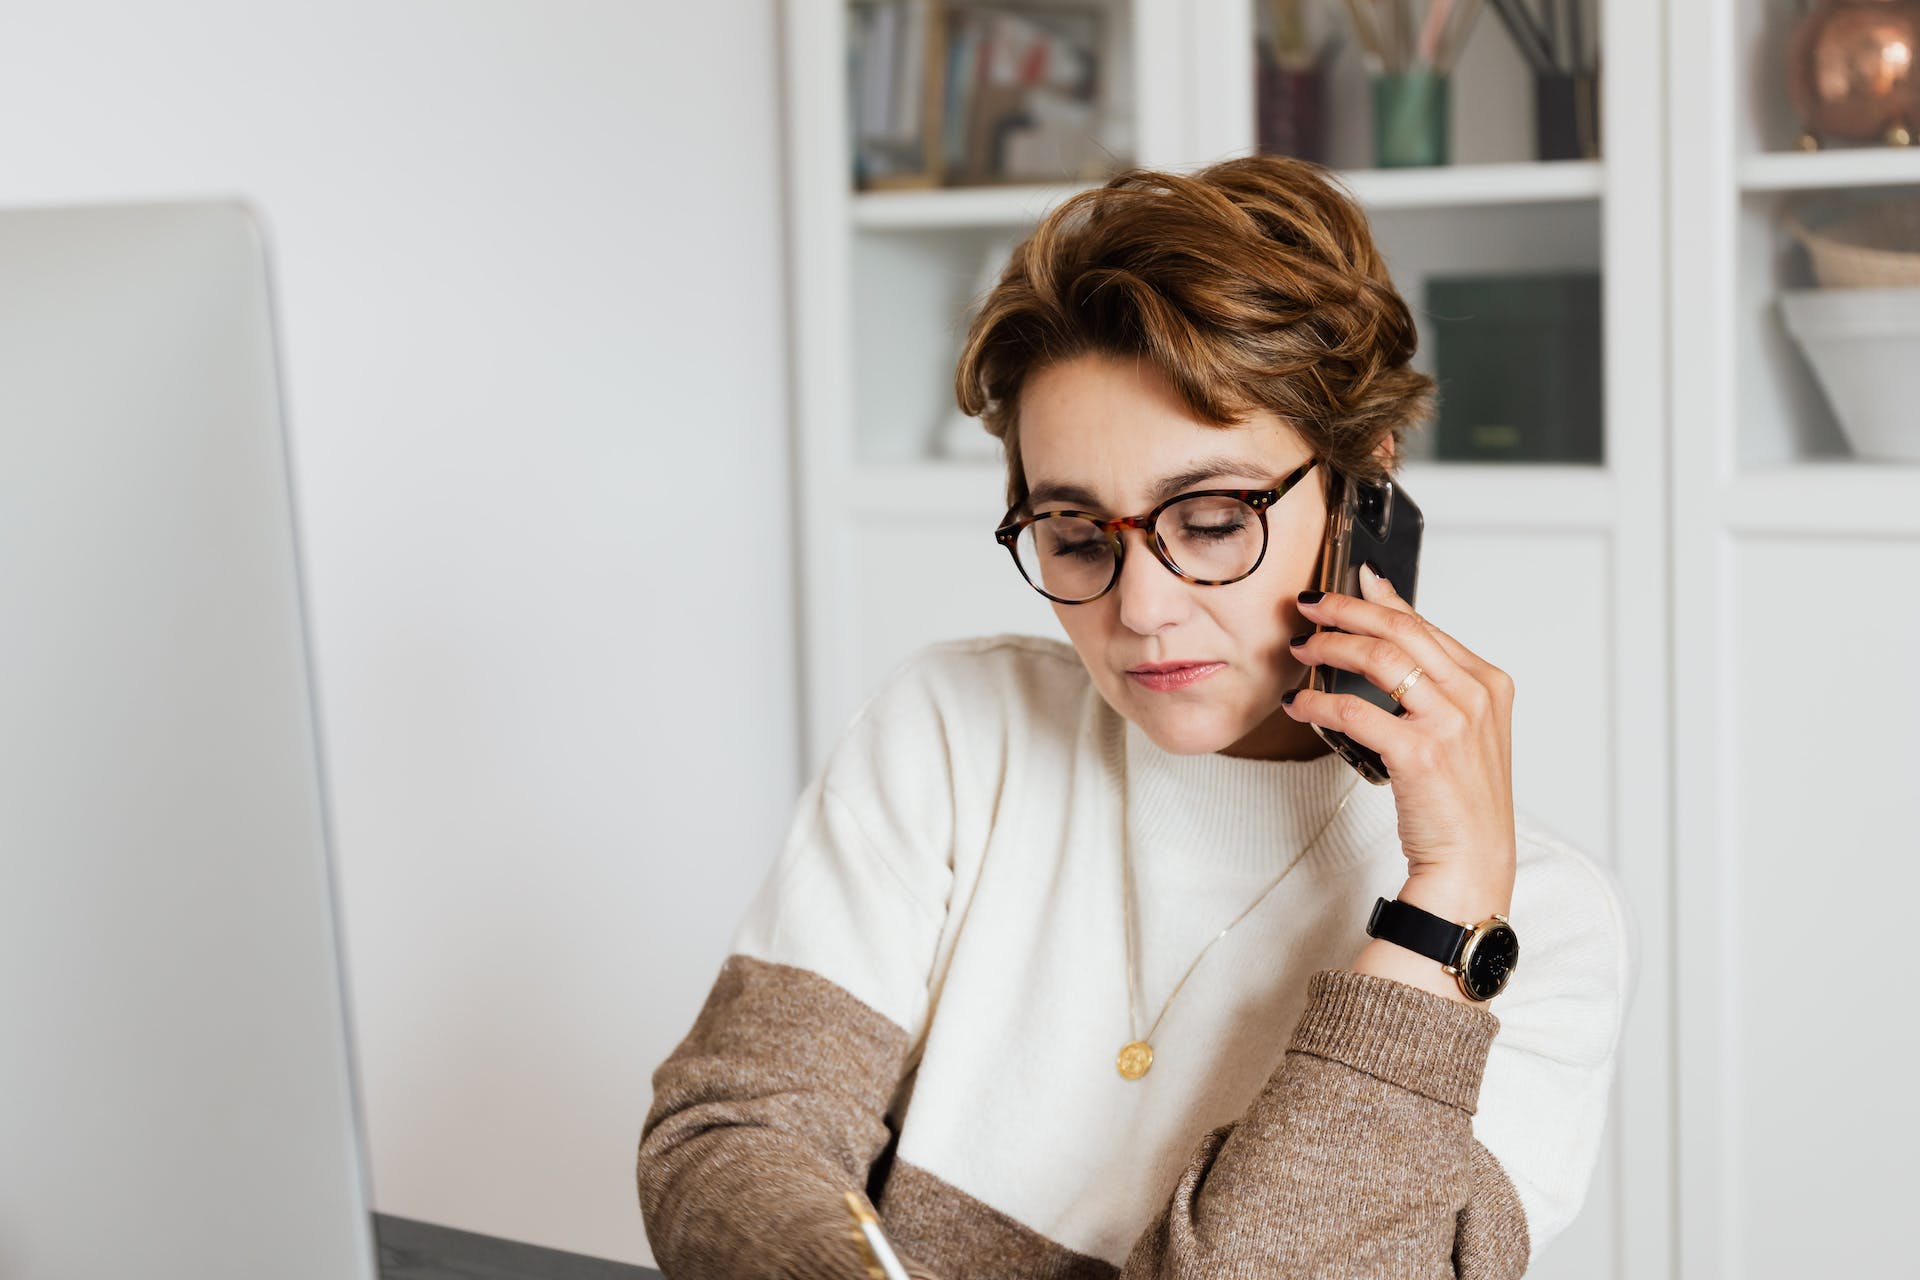 A woman attending a phone call | Source: Pexels